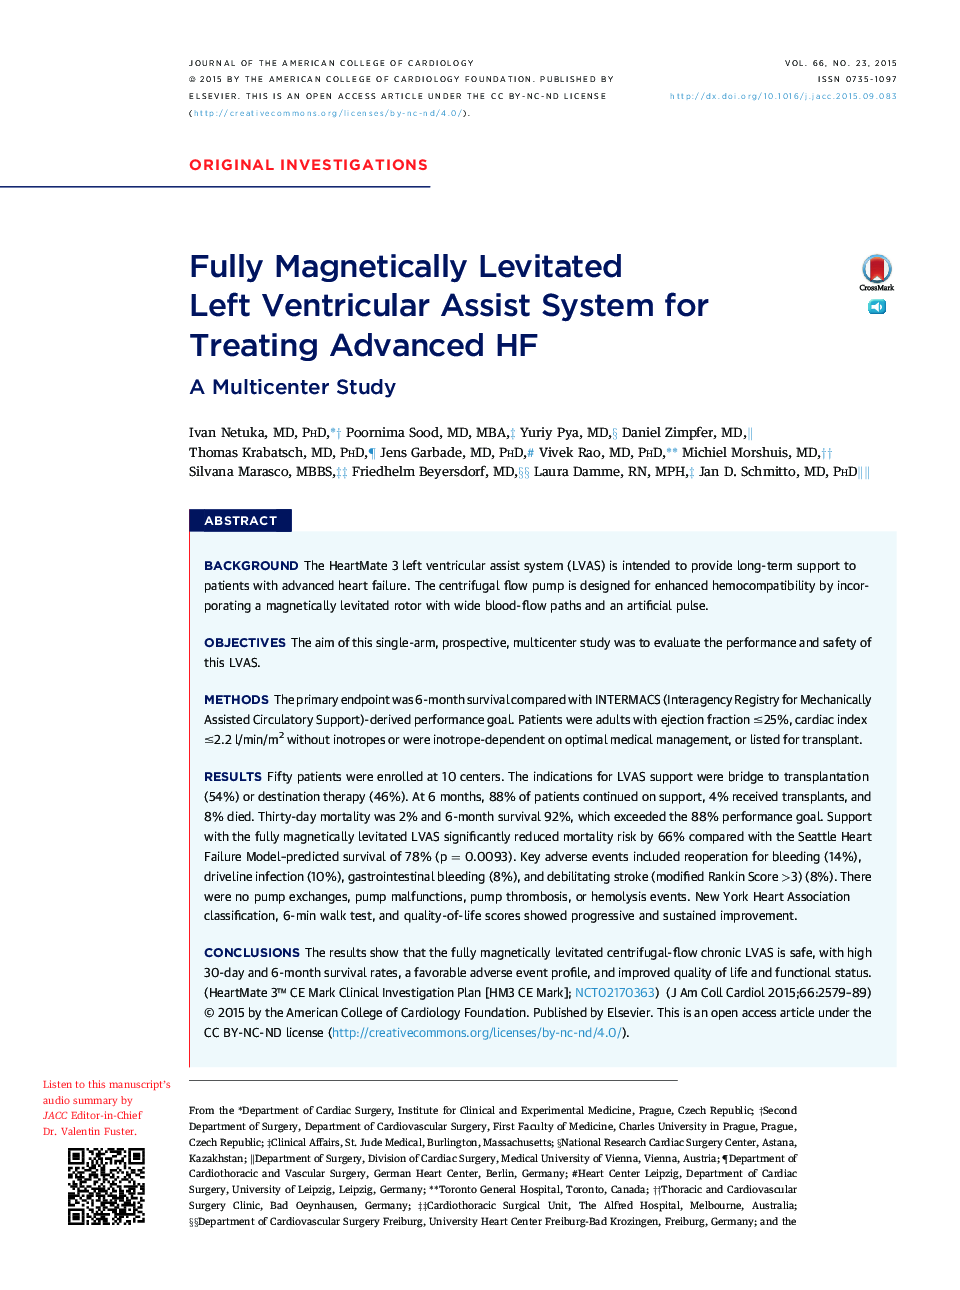 Fully Magnetically Levitated LeftÂ Ventricular Assist System for TreatingÂ Advanced HF: A Multicenter Study